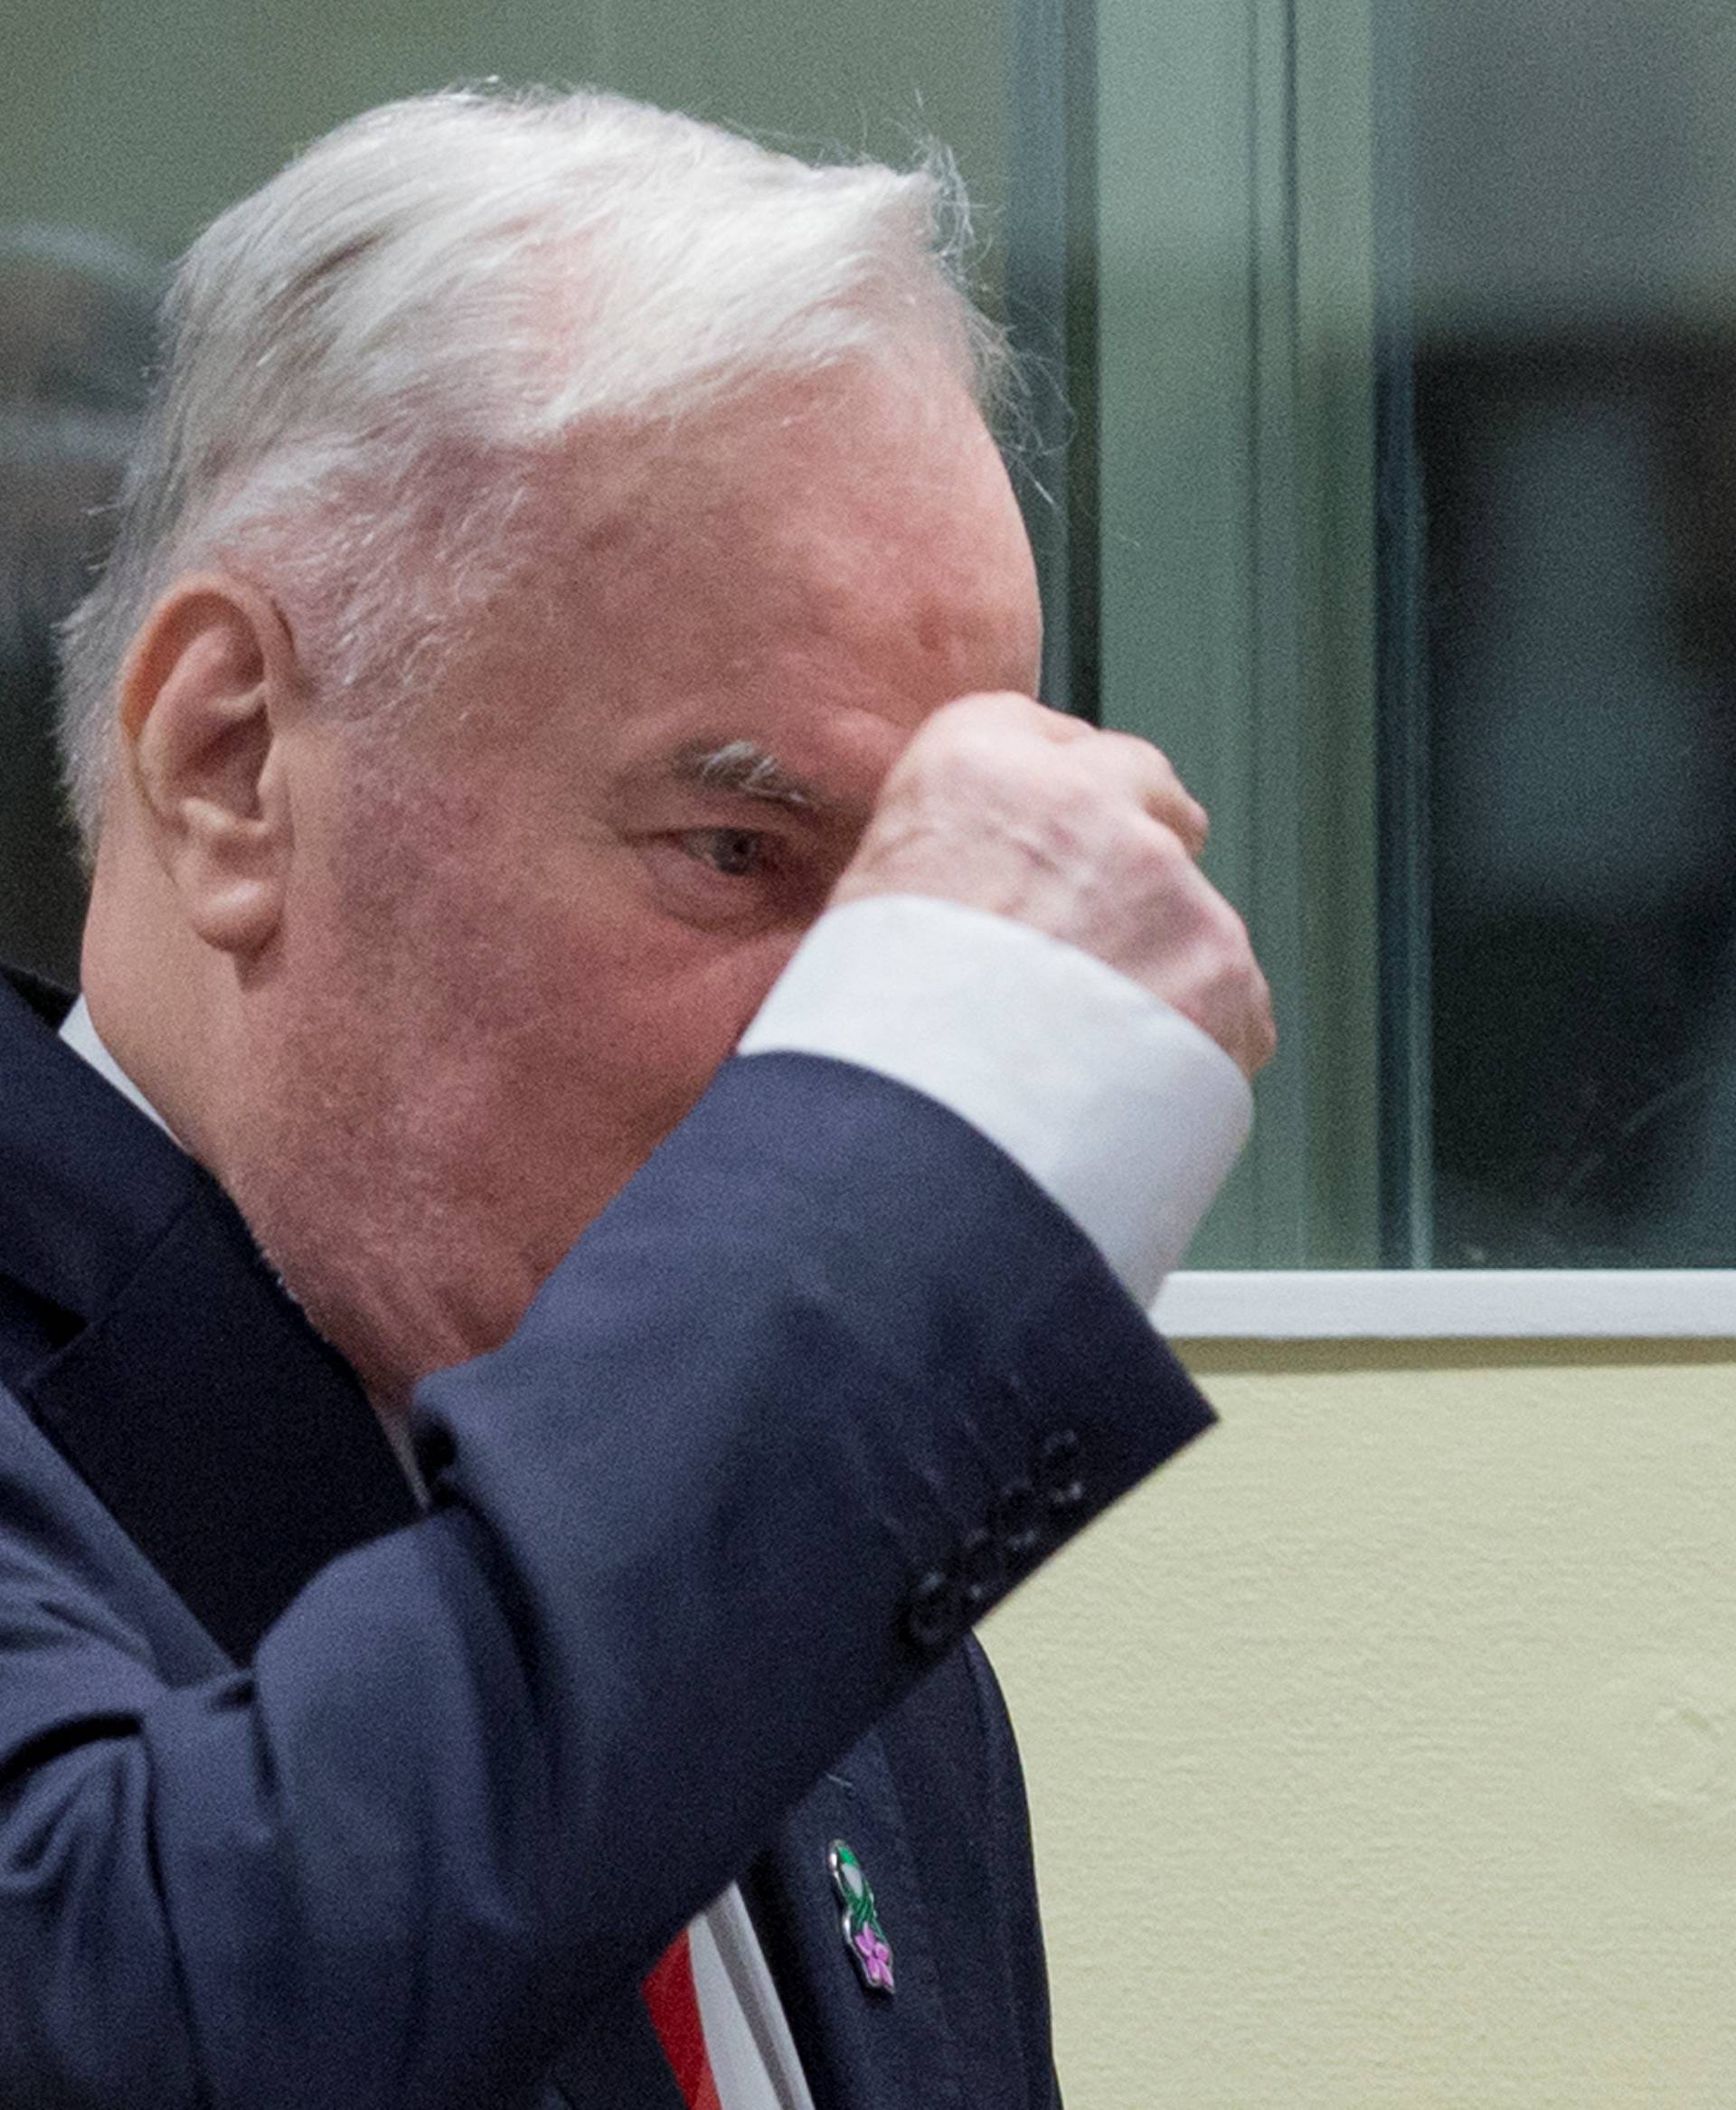 Ex-Bosnian Serb wartime general Ratko Mladic makes the sign of the cross while appearing in court at the International Criminal Tribunal for the former Yugoslavia in the Hague